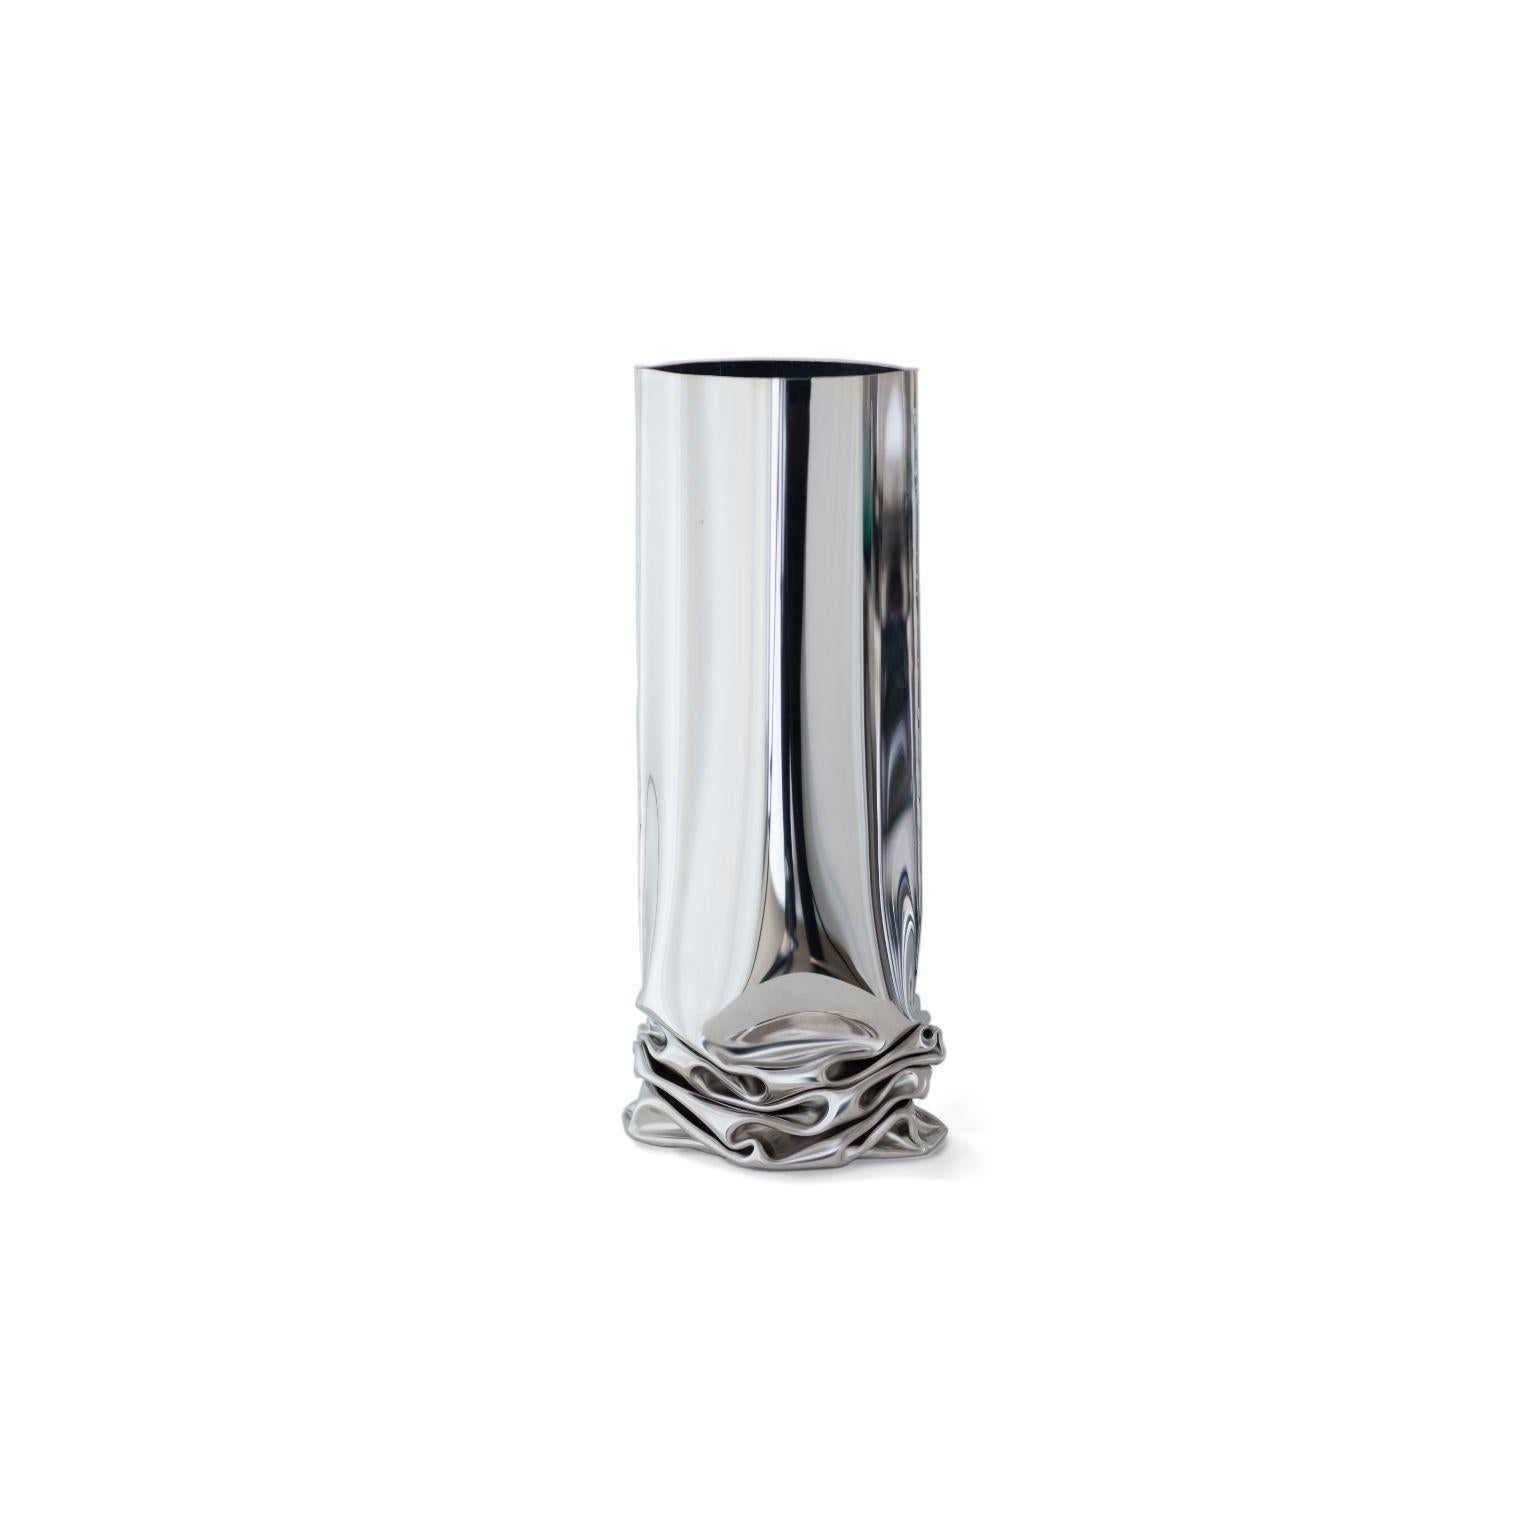 Crash 1 vase by Zieta
Dimensions: D 20 x W 13.5 x H 30 cm
Materials: stainless steel.

Zieta's main goal is to deliver uniqueness and customization in design and construction while keeping production, transport, and warehousing innovatively